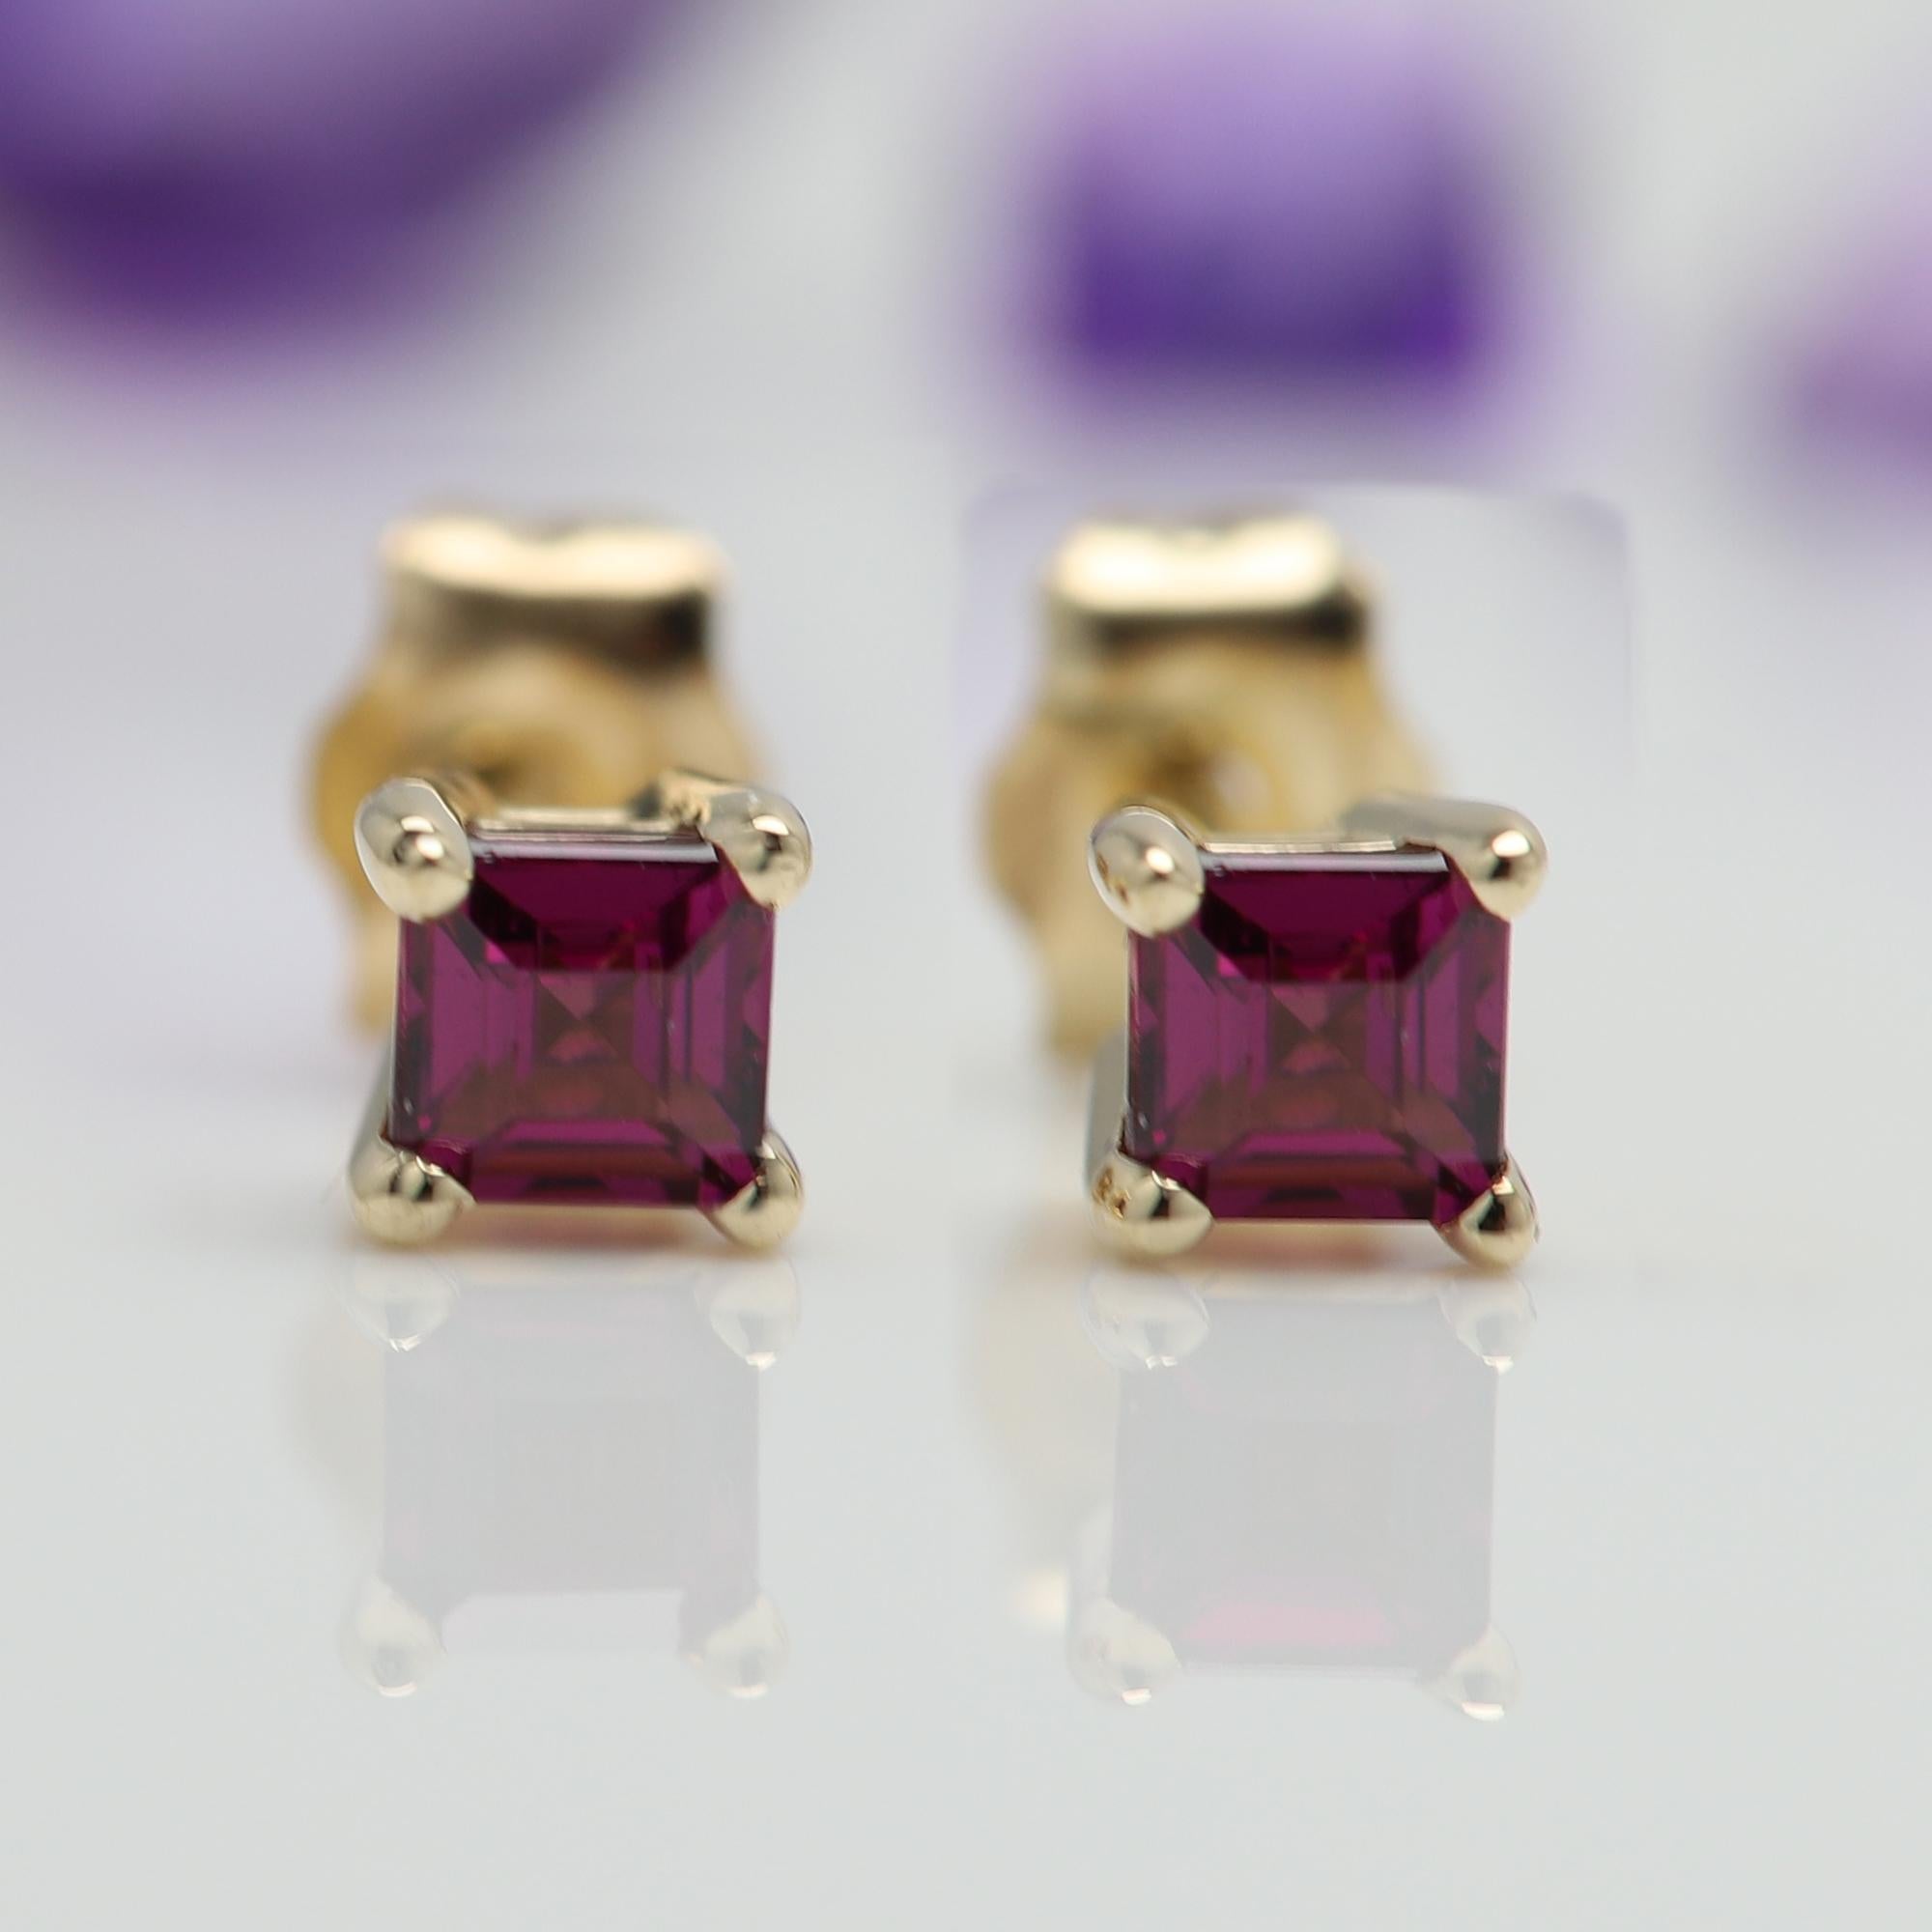 Solid 14k Yellow Gold 
Natural Maroon Rhodolite Gemstone
1 pair ( 2pieces )
each stone is 3.0 mm approx 0.20 carat 
Square shape
AA Quality Gems
due to natural formations minor inclusions or imperfections may occur
Good for any age
+Gift Box
